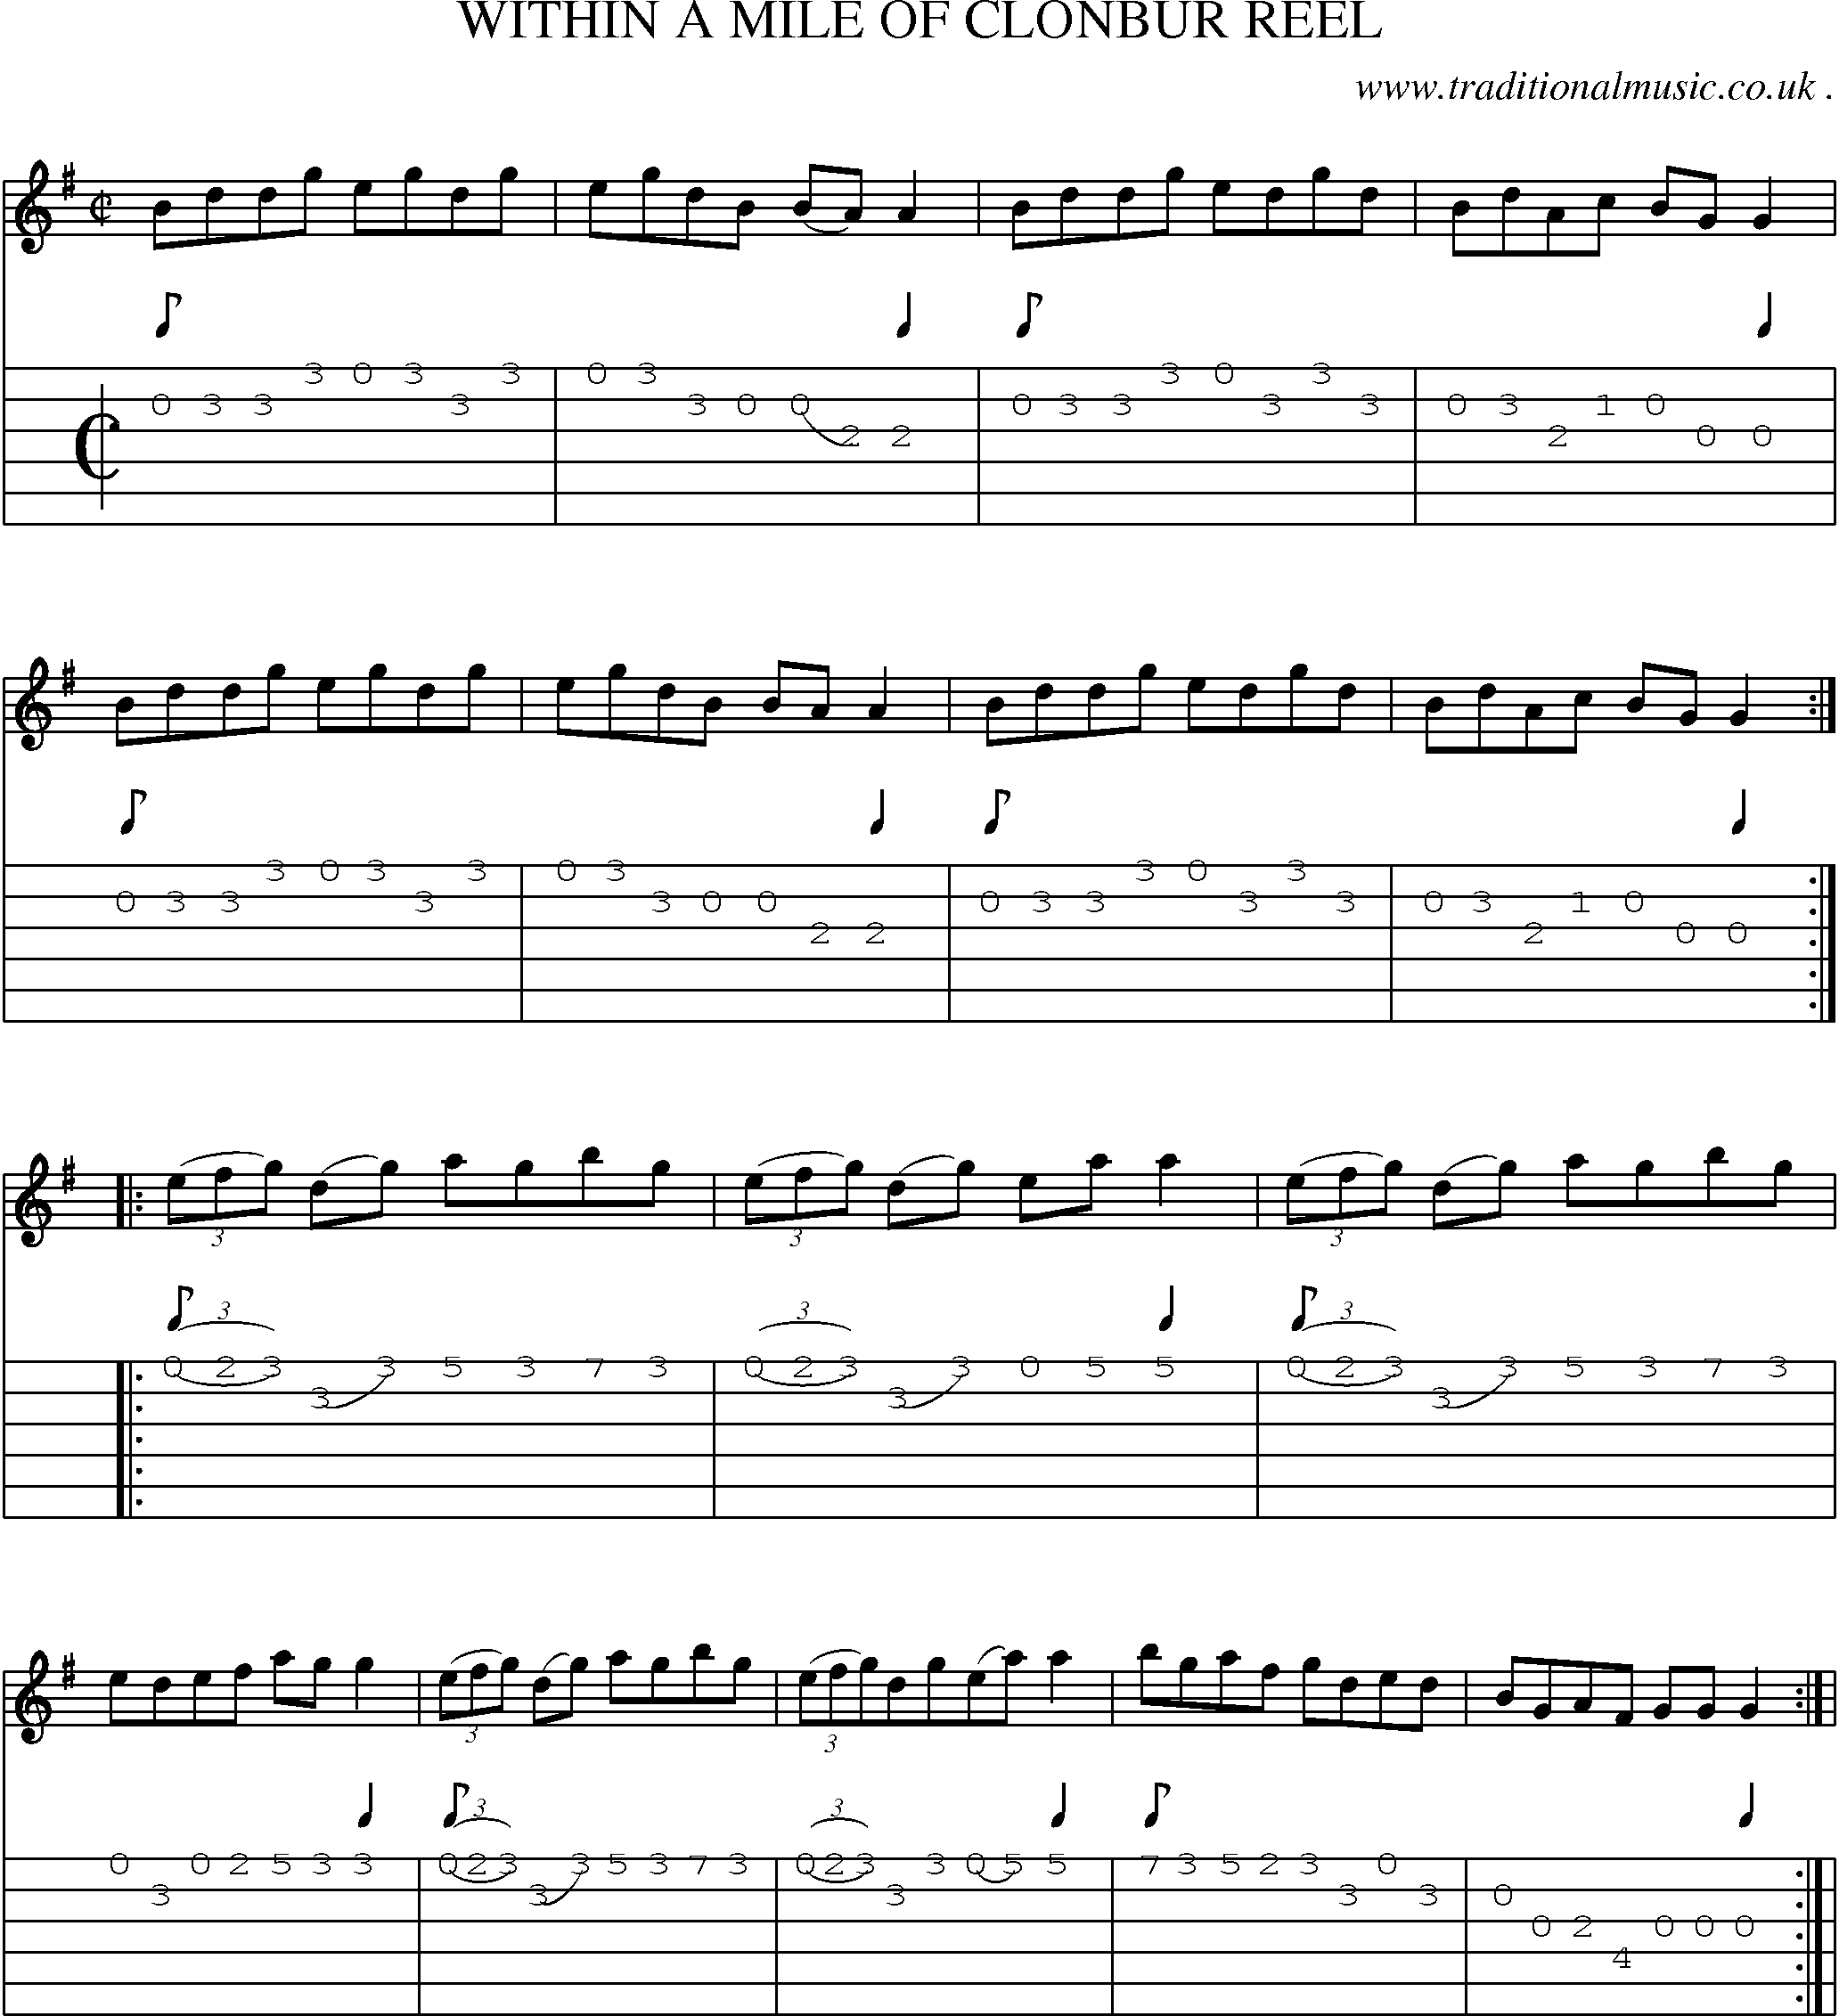 Sheet-Music and Guitar Tabs for Within A Mile Of Clonbur Reel